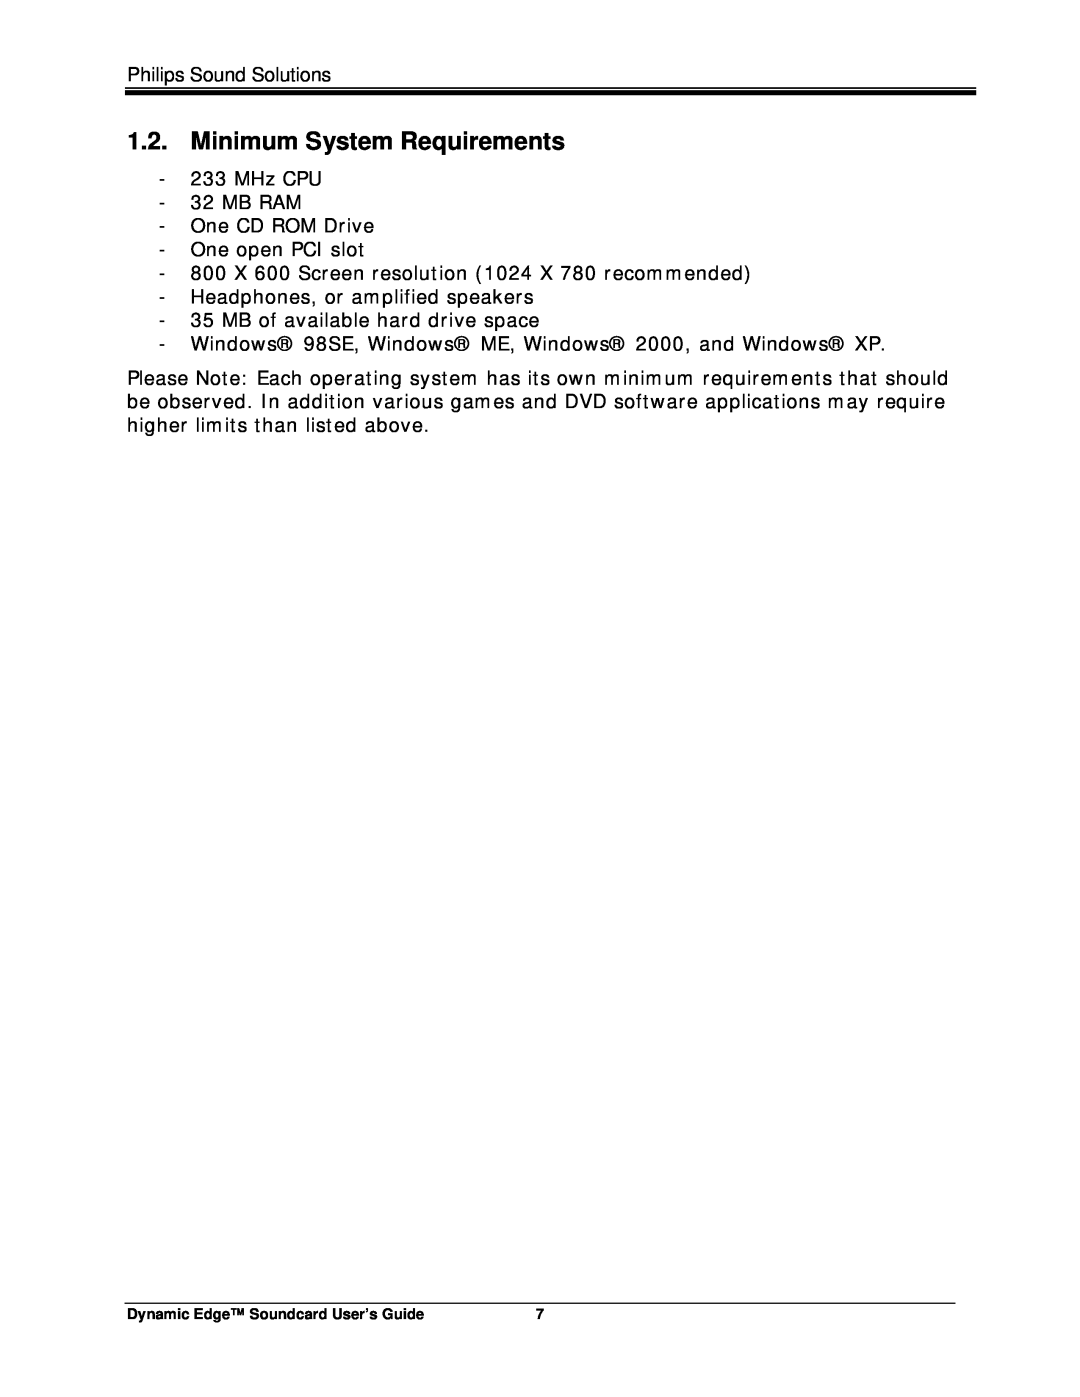 Philips PSC604 manual Minimum System Requirements 